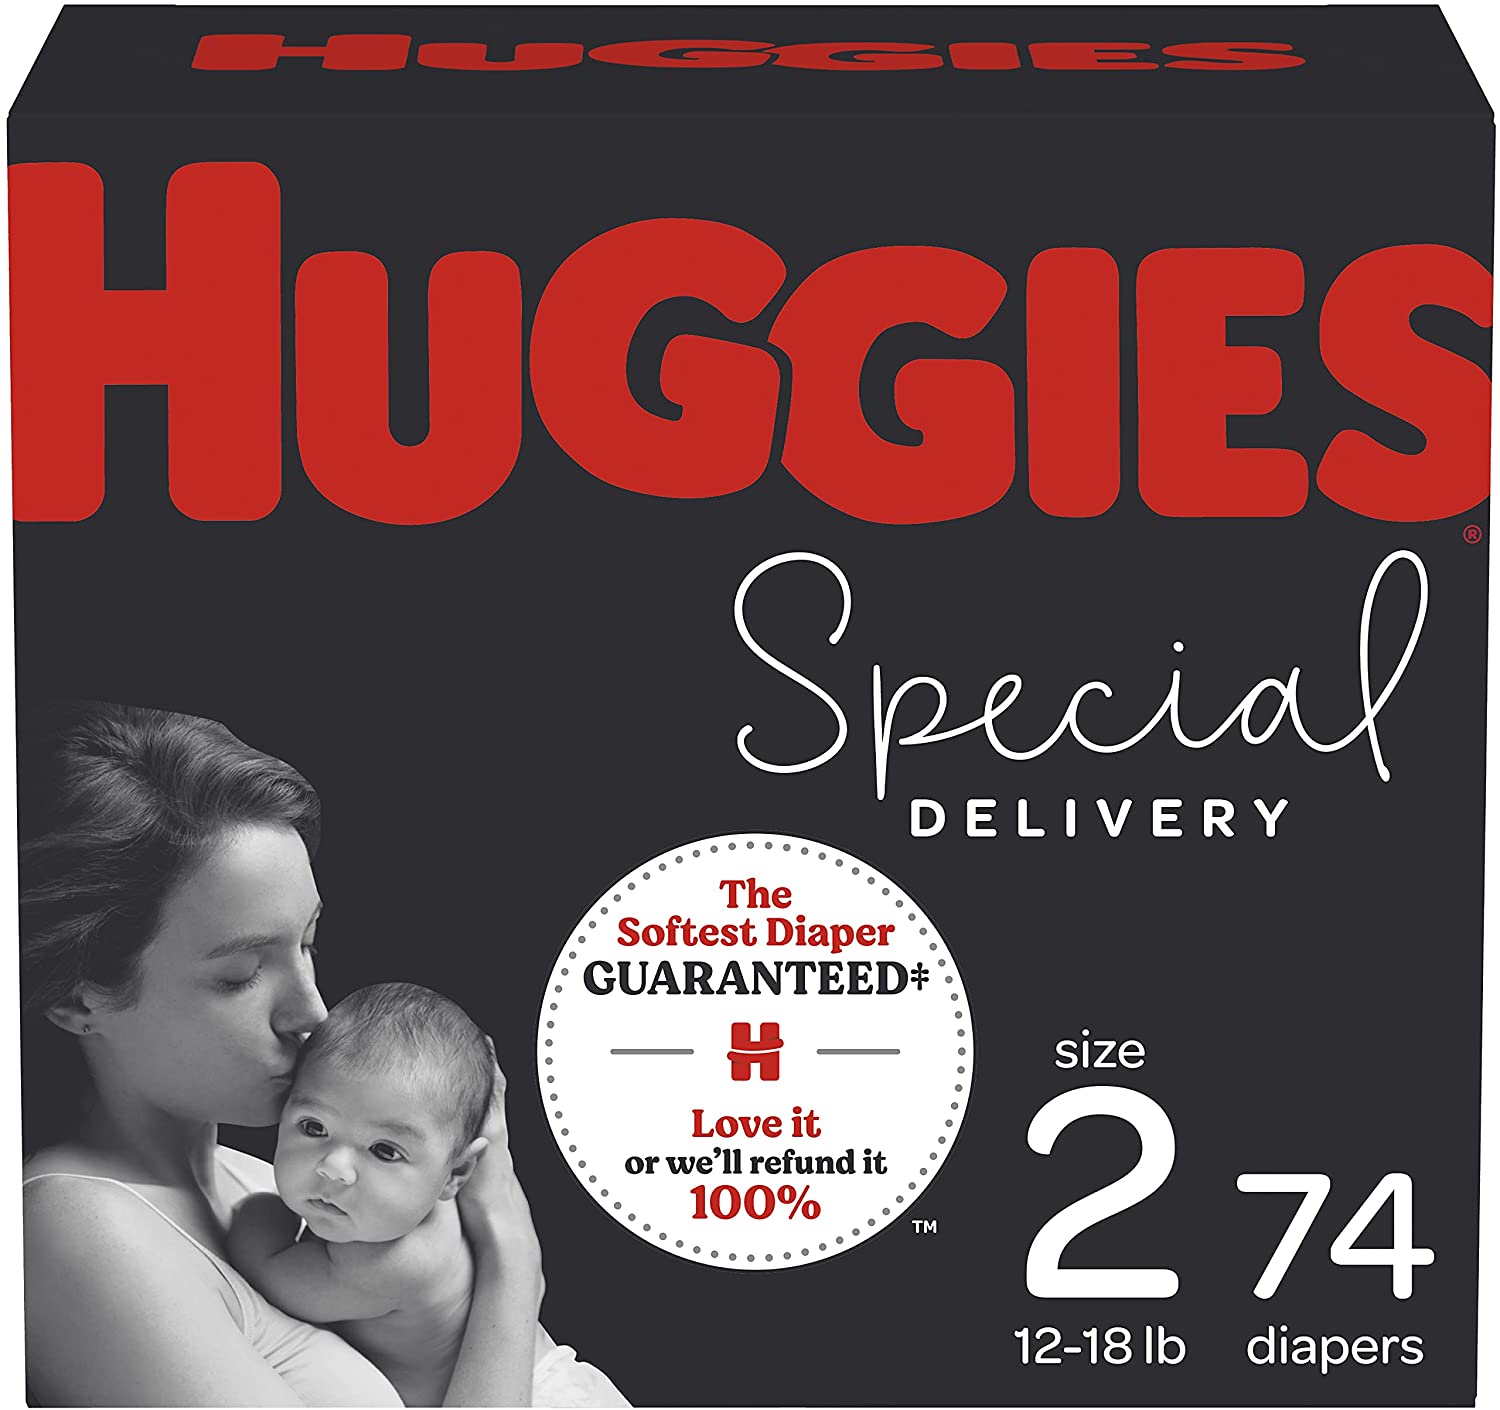 Huggies Special Delivery Diapers Price Drop at Amazon!